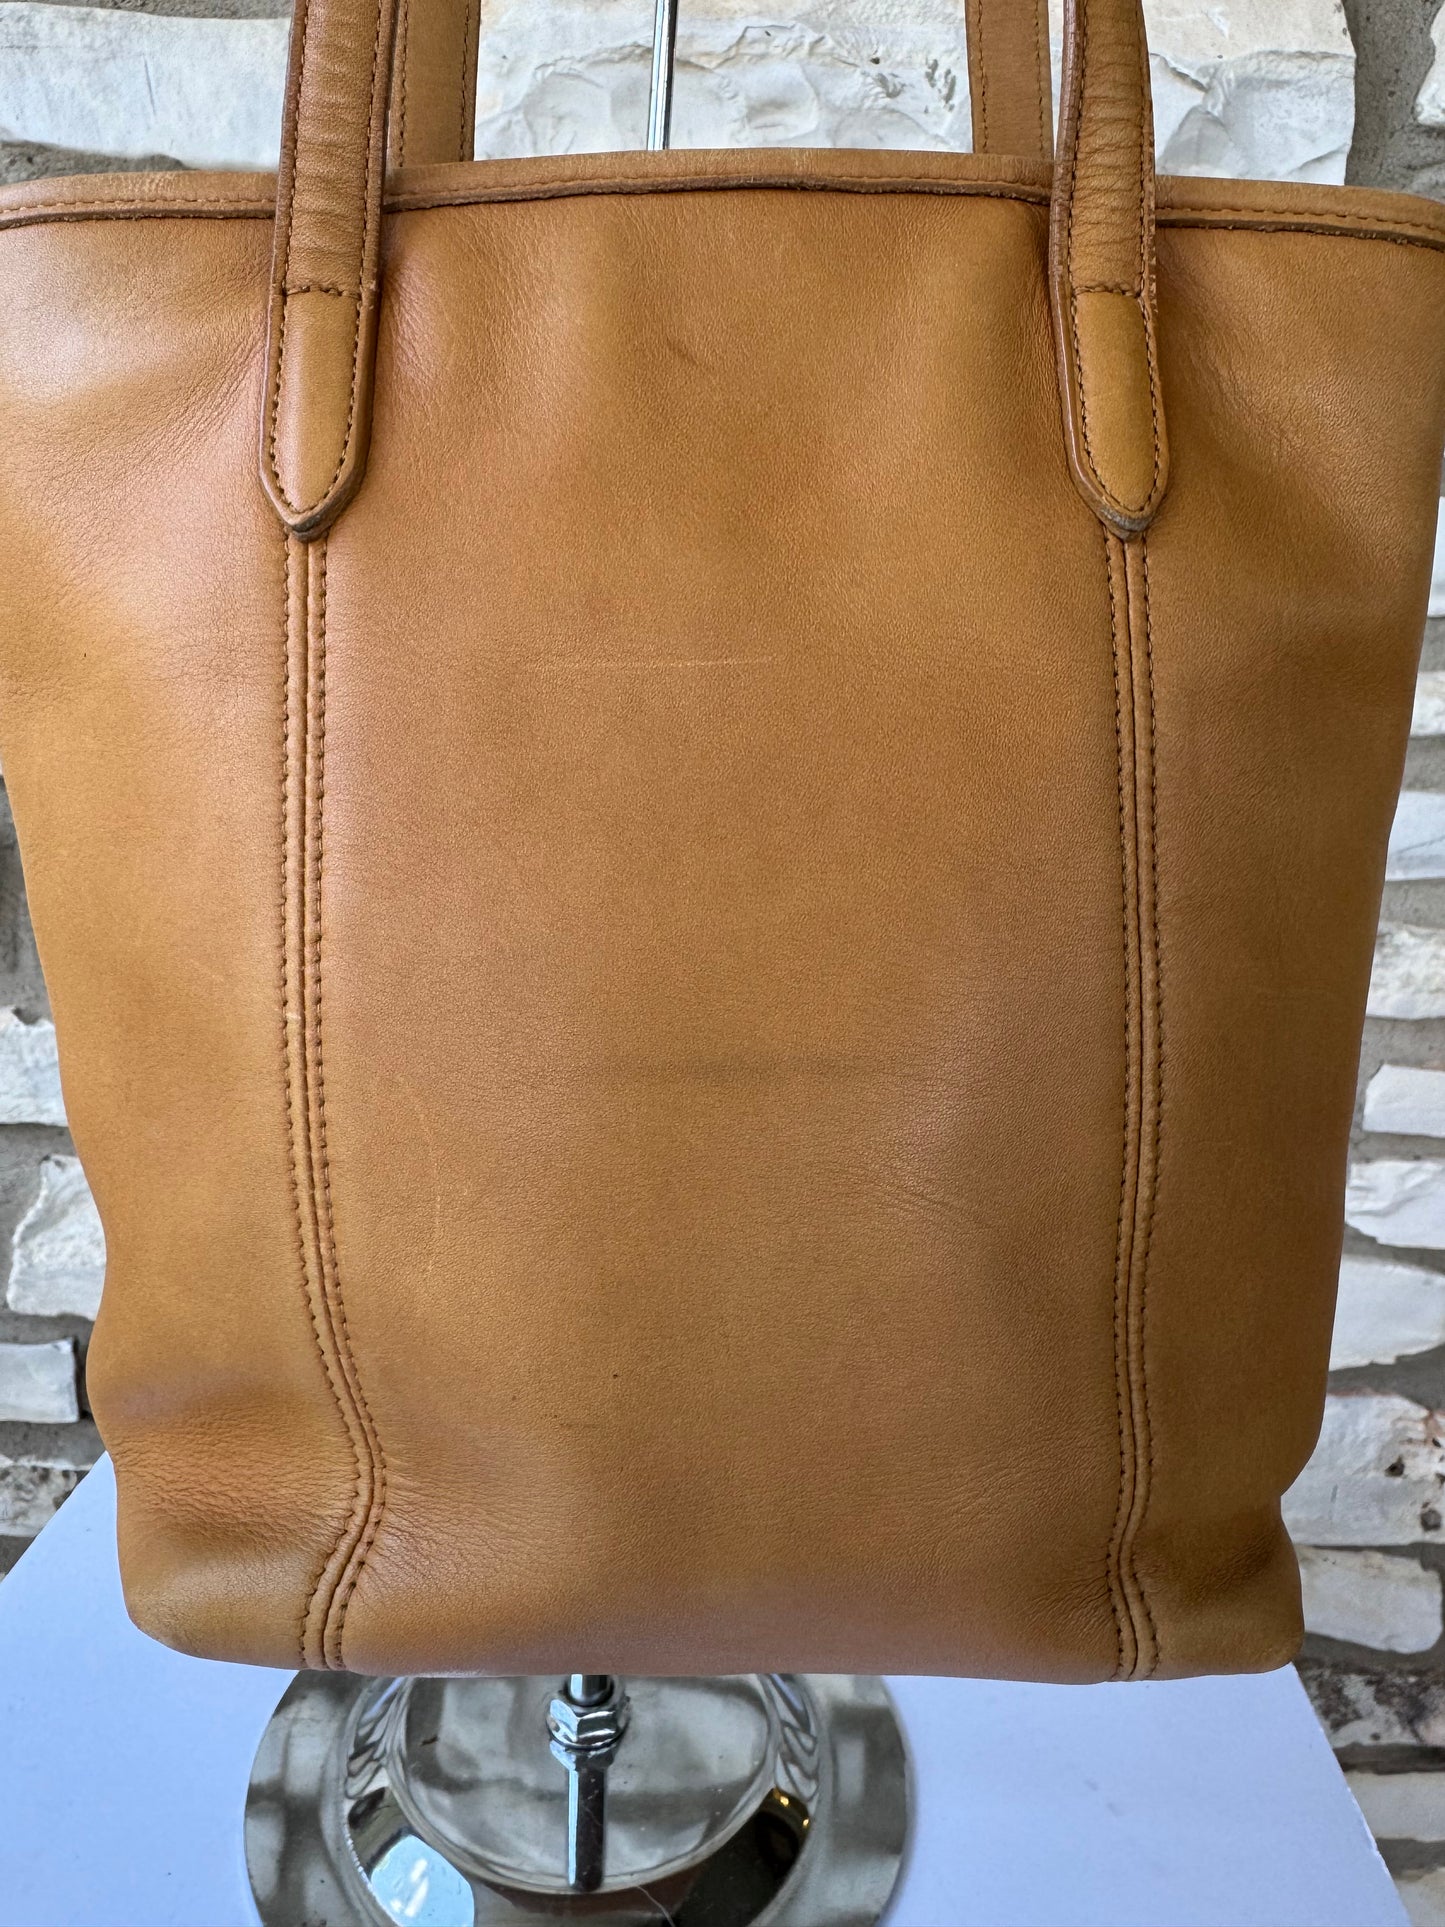 Vintage Coach Legacy Lunch Tote in Camel 9077